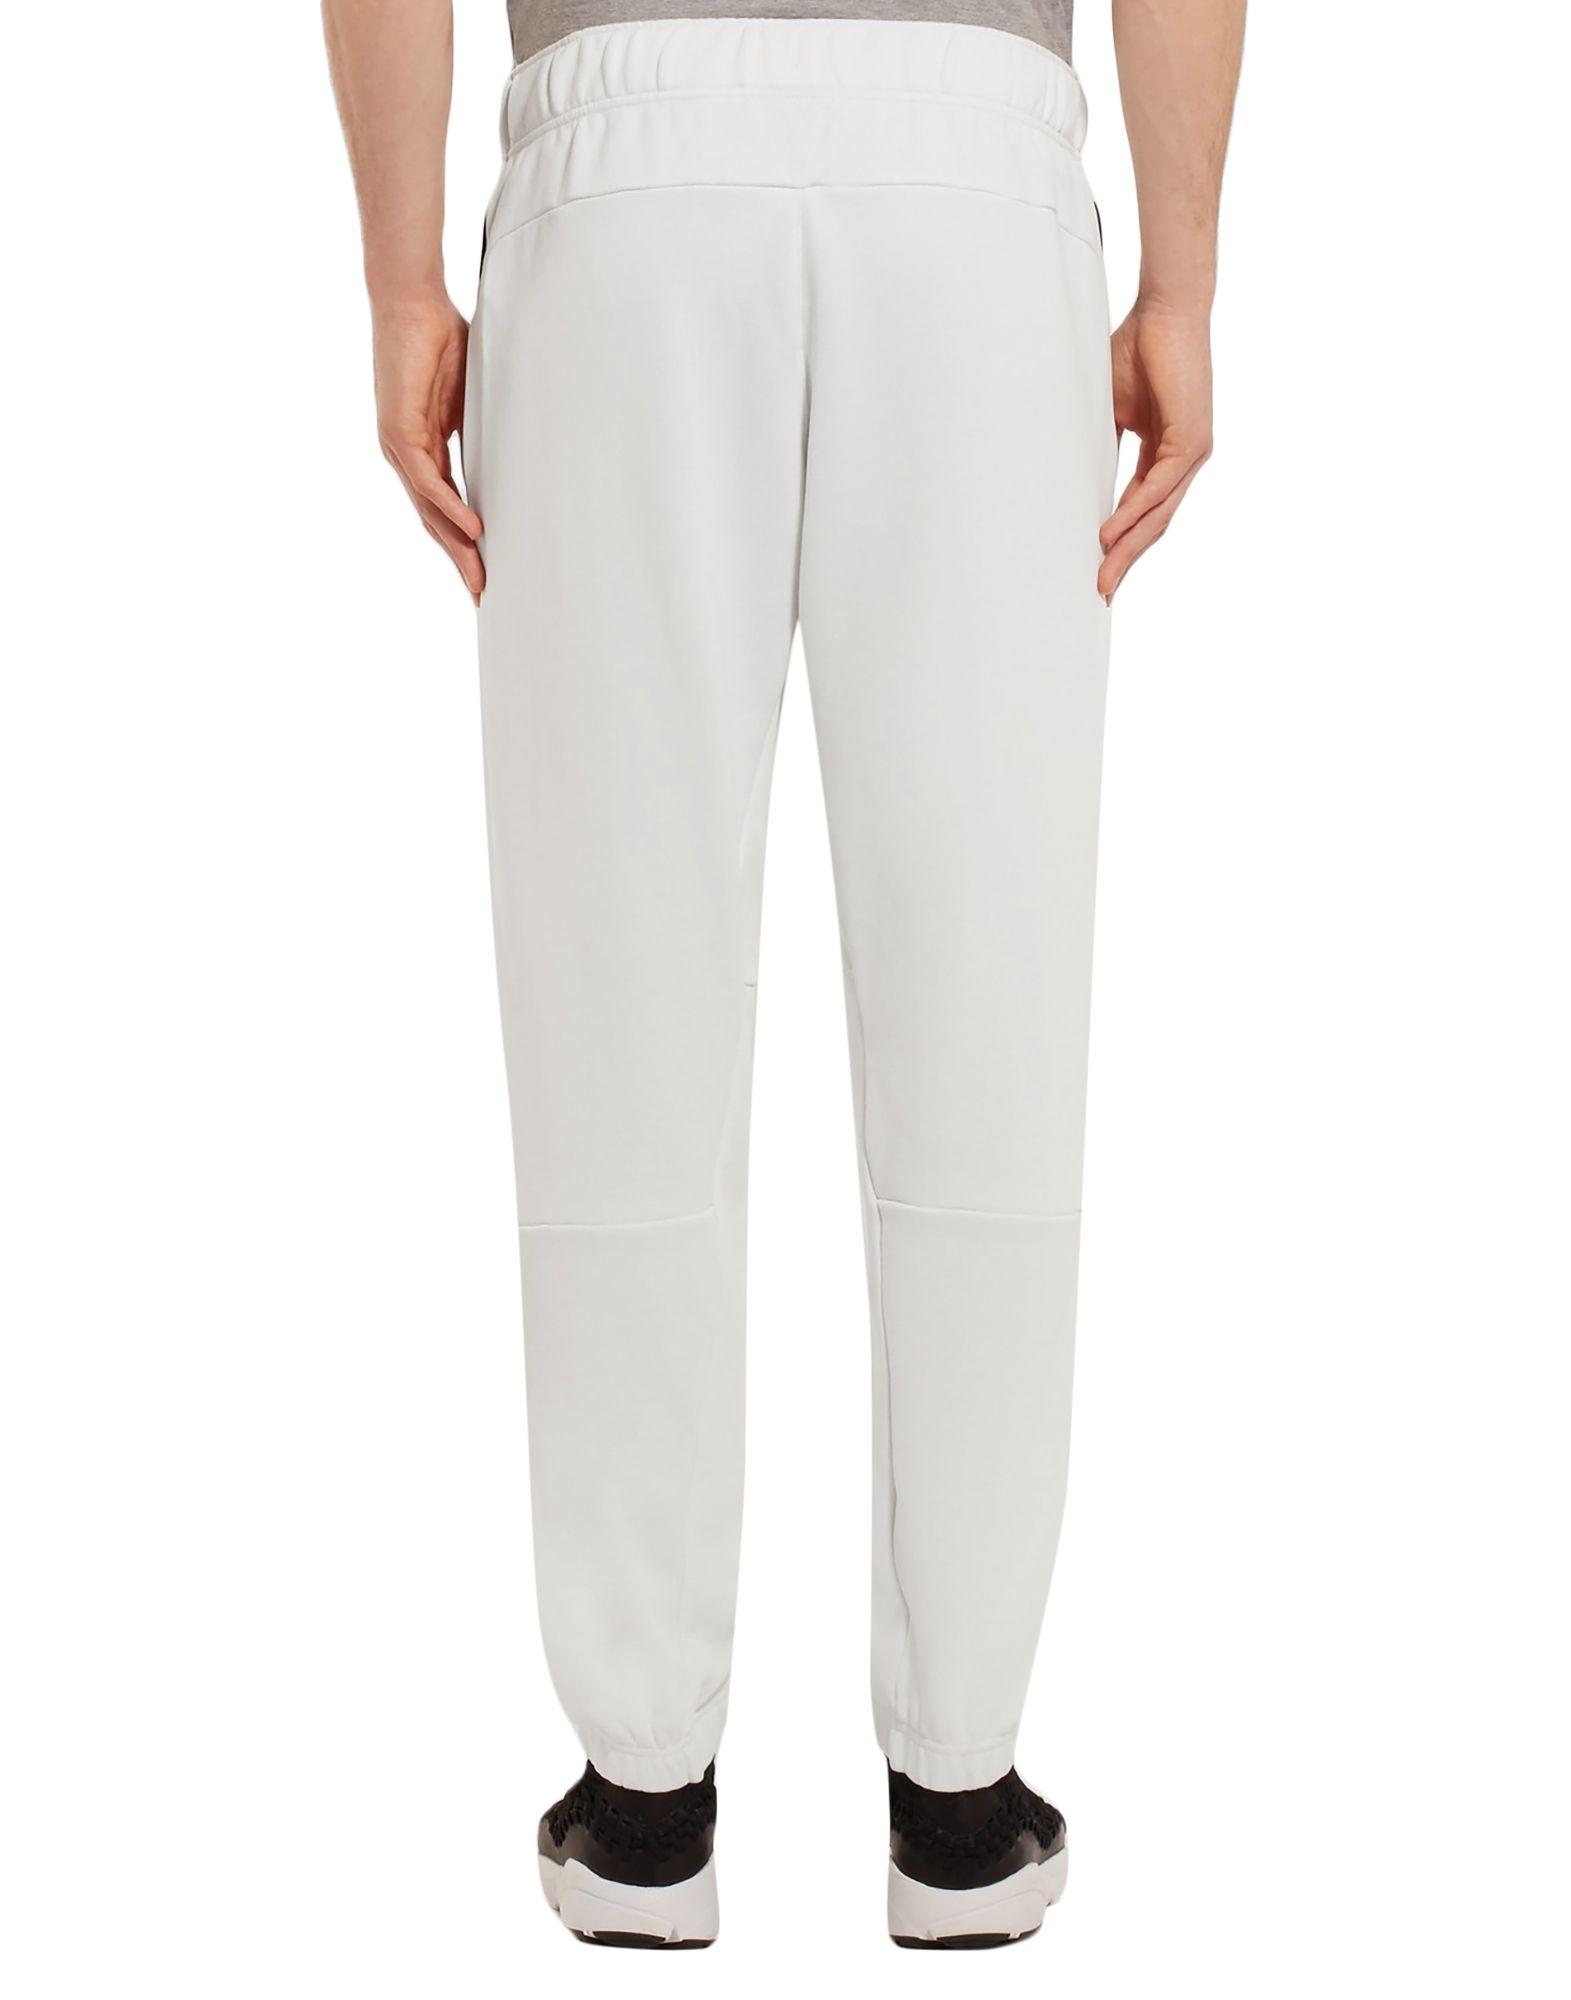 Nike Casual Pants in White for Men - Lyst